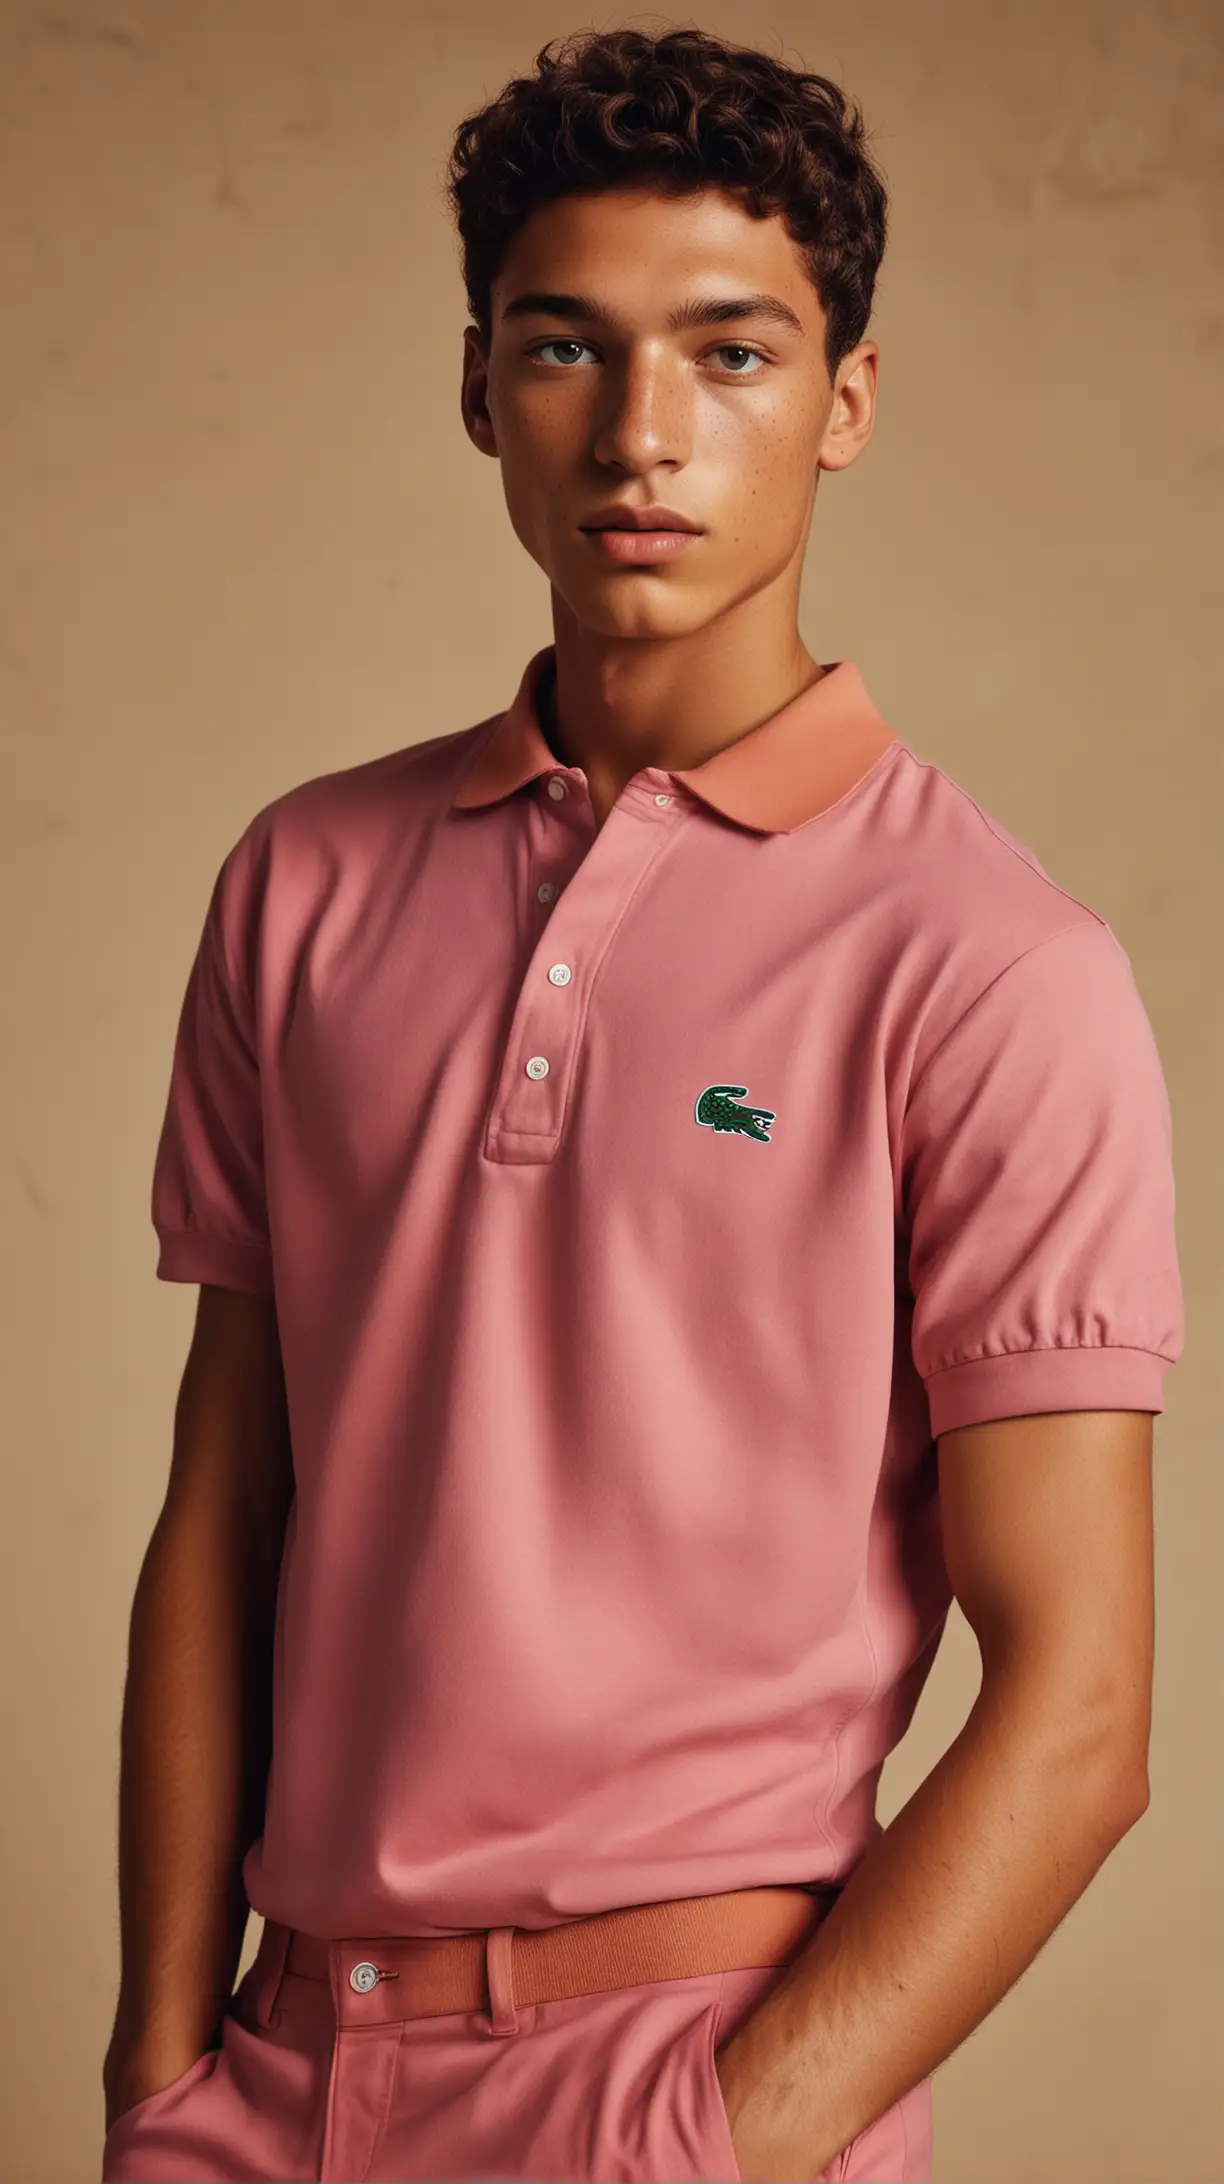 male models with freckels and semi dark skin is posing like in an old Michelangelo painting, models are wearing full lacoste outfits, colorful clothes